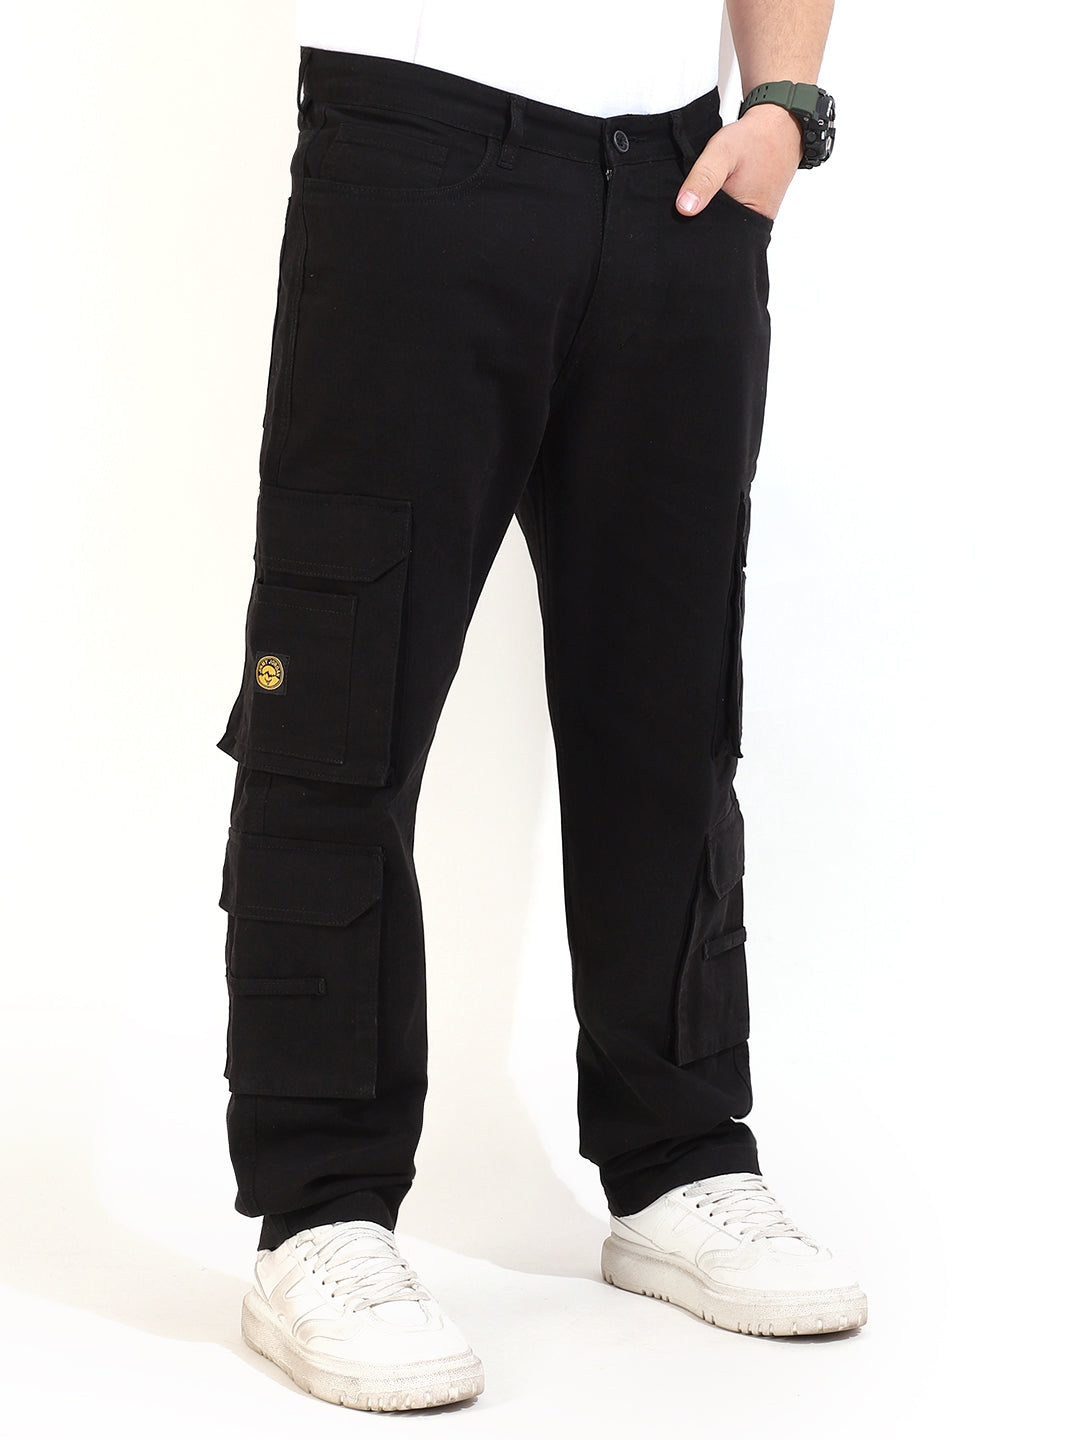 Black Cotton Drill 8 pocket Baggy Fit Cargo